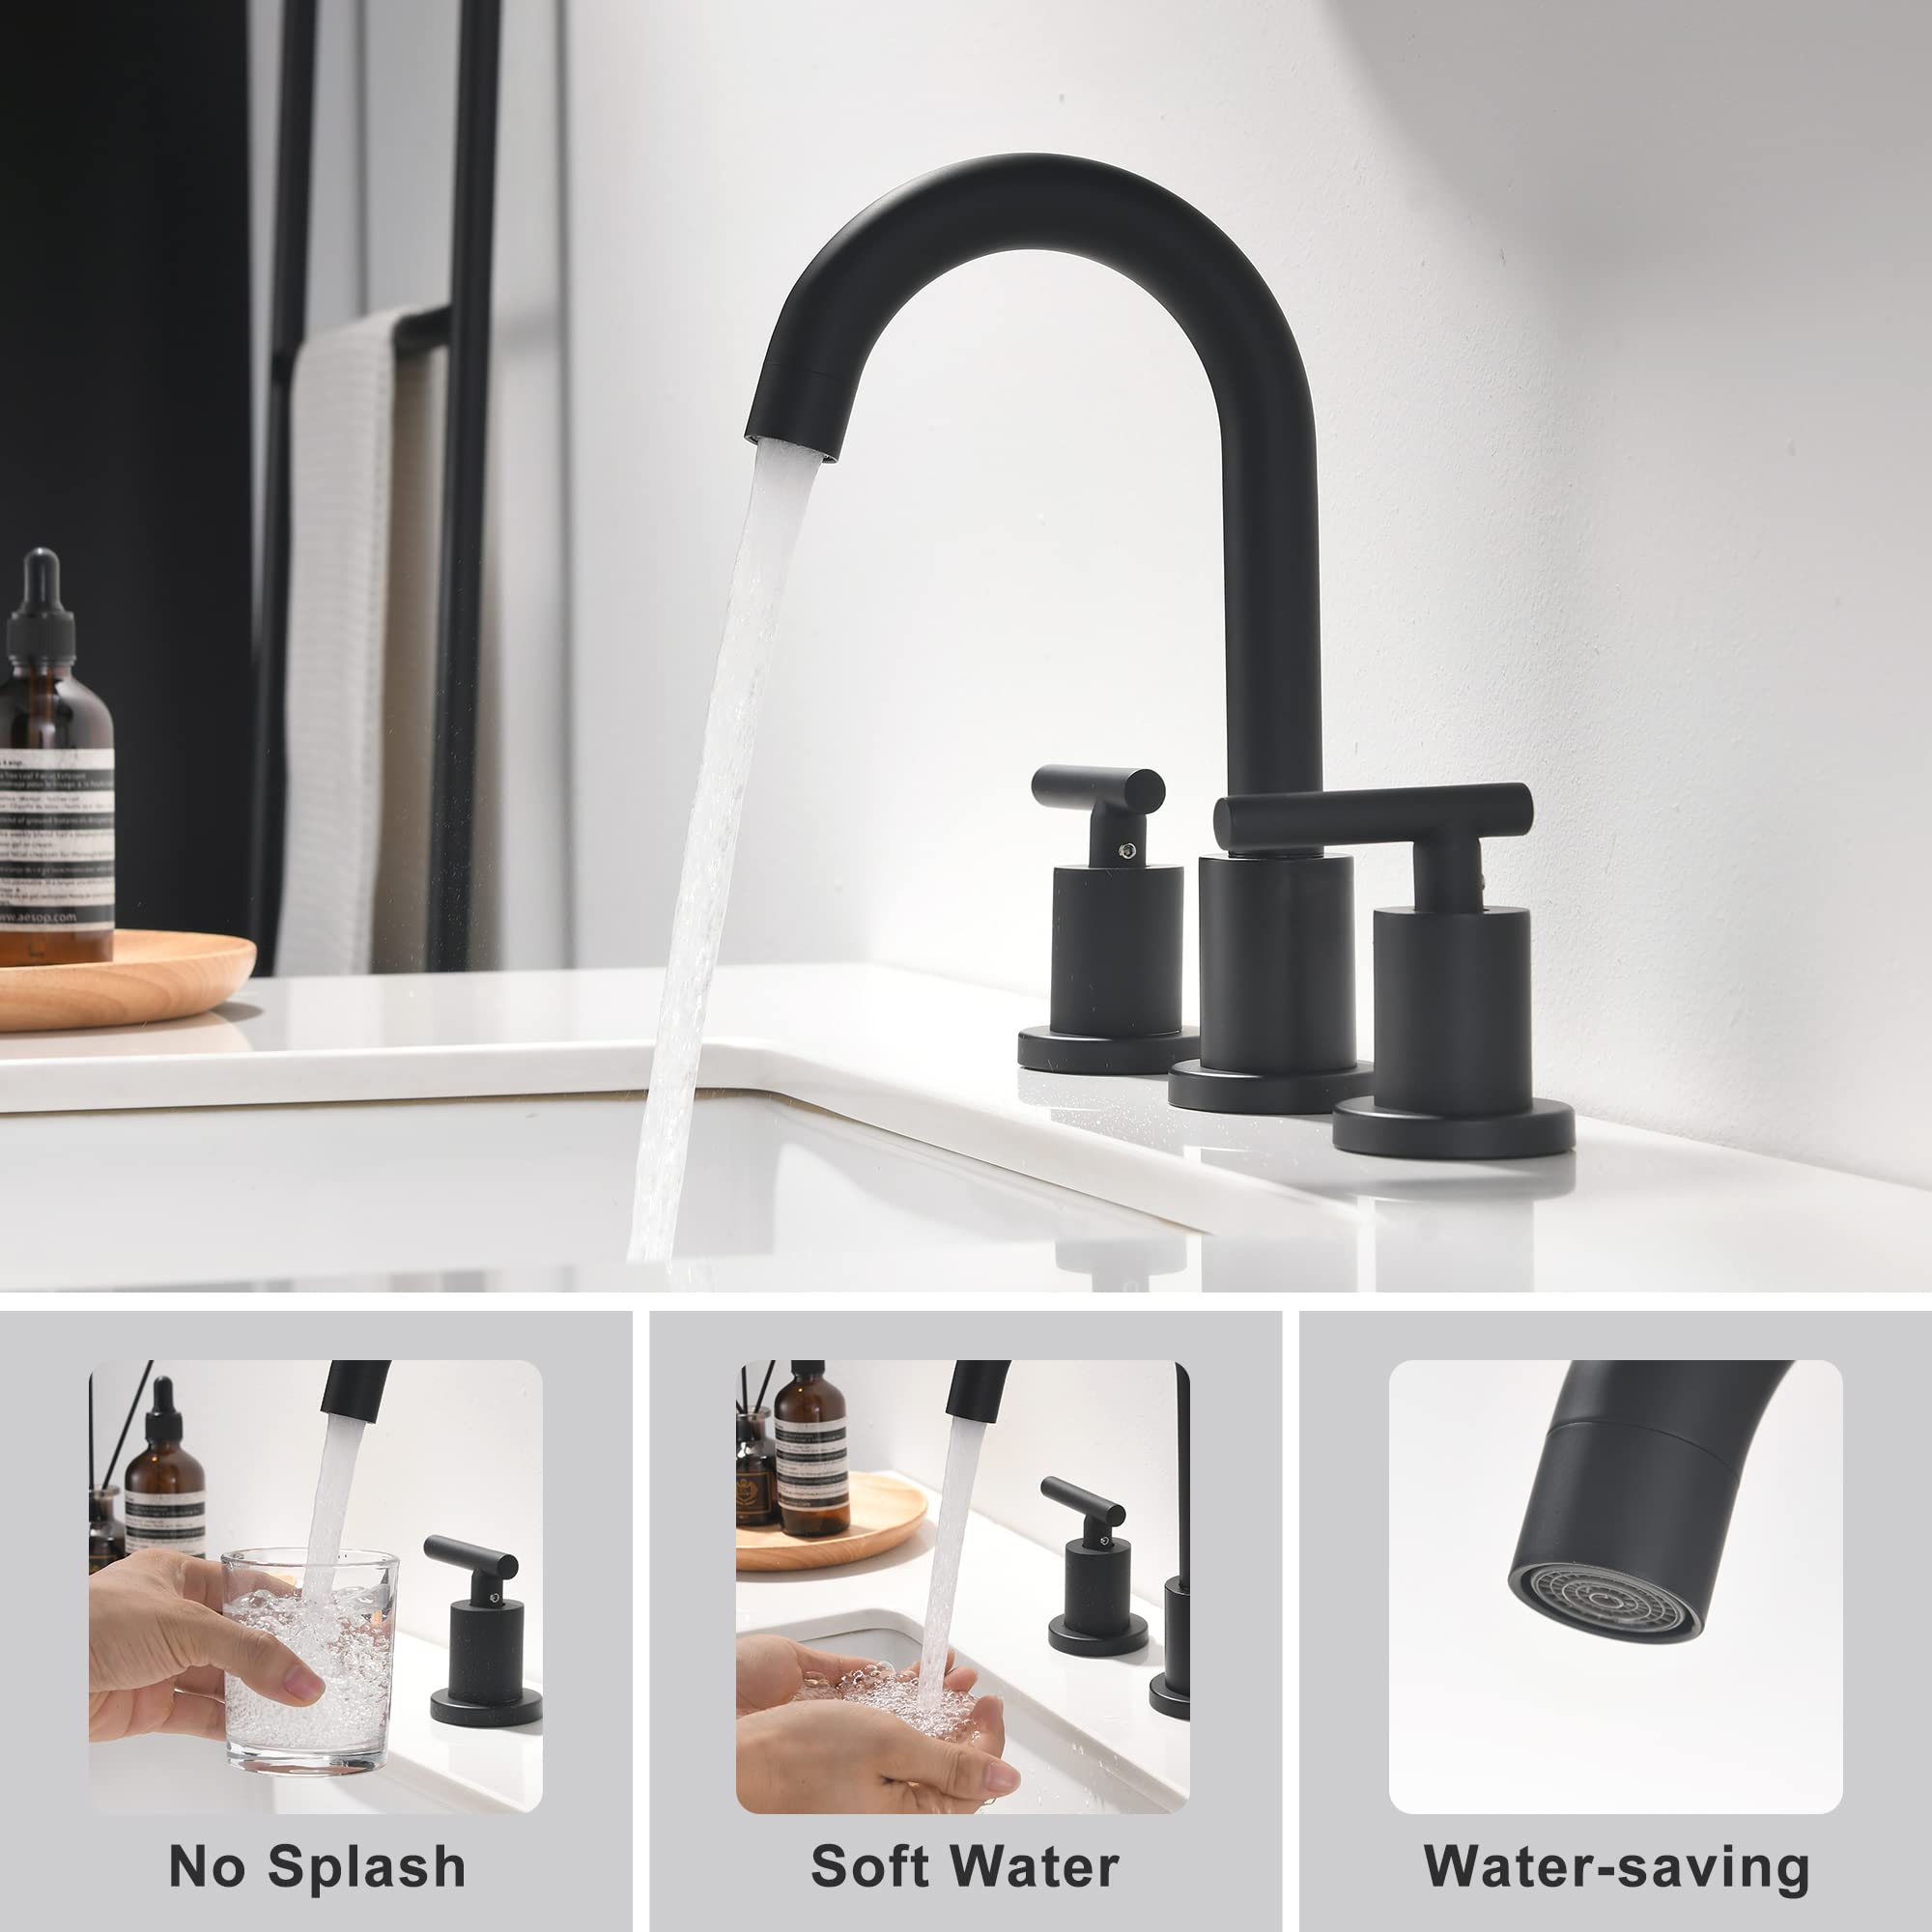 FROPO Two Handle Widespread Bathroom Sink Faucet - 3 Hole Vanity Faucet with Pop-Up Drain & cUPC Faucet Supply Lines, 8 Inch Black Bathroom Sink Faucet